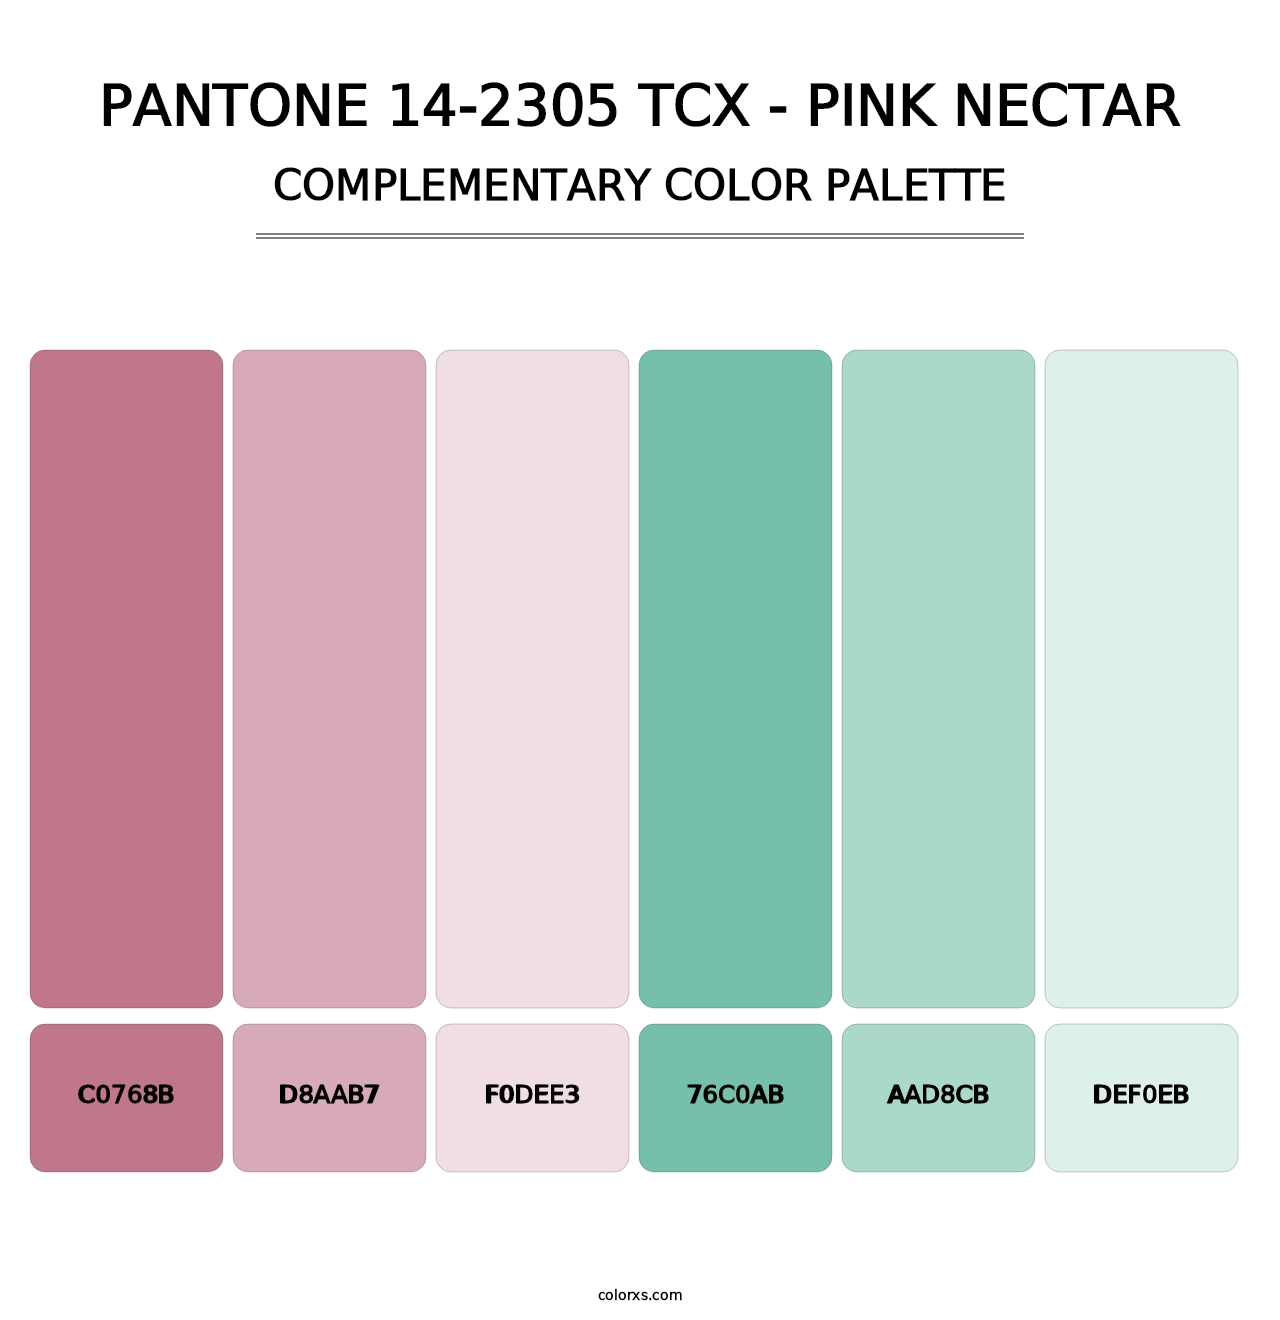 PANTONE 14-2305 TCX - Pink Nectar - Complementary Color Palette